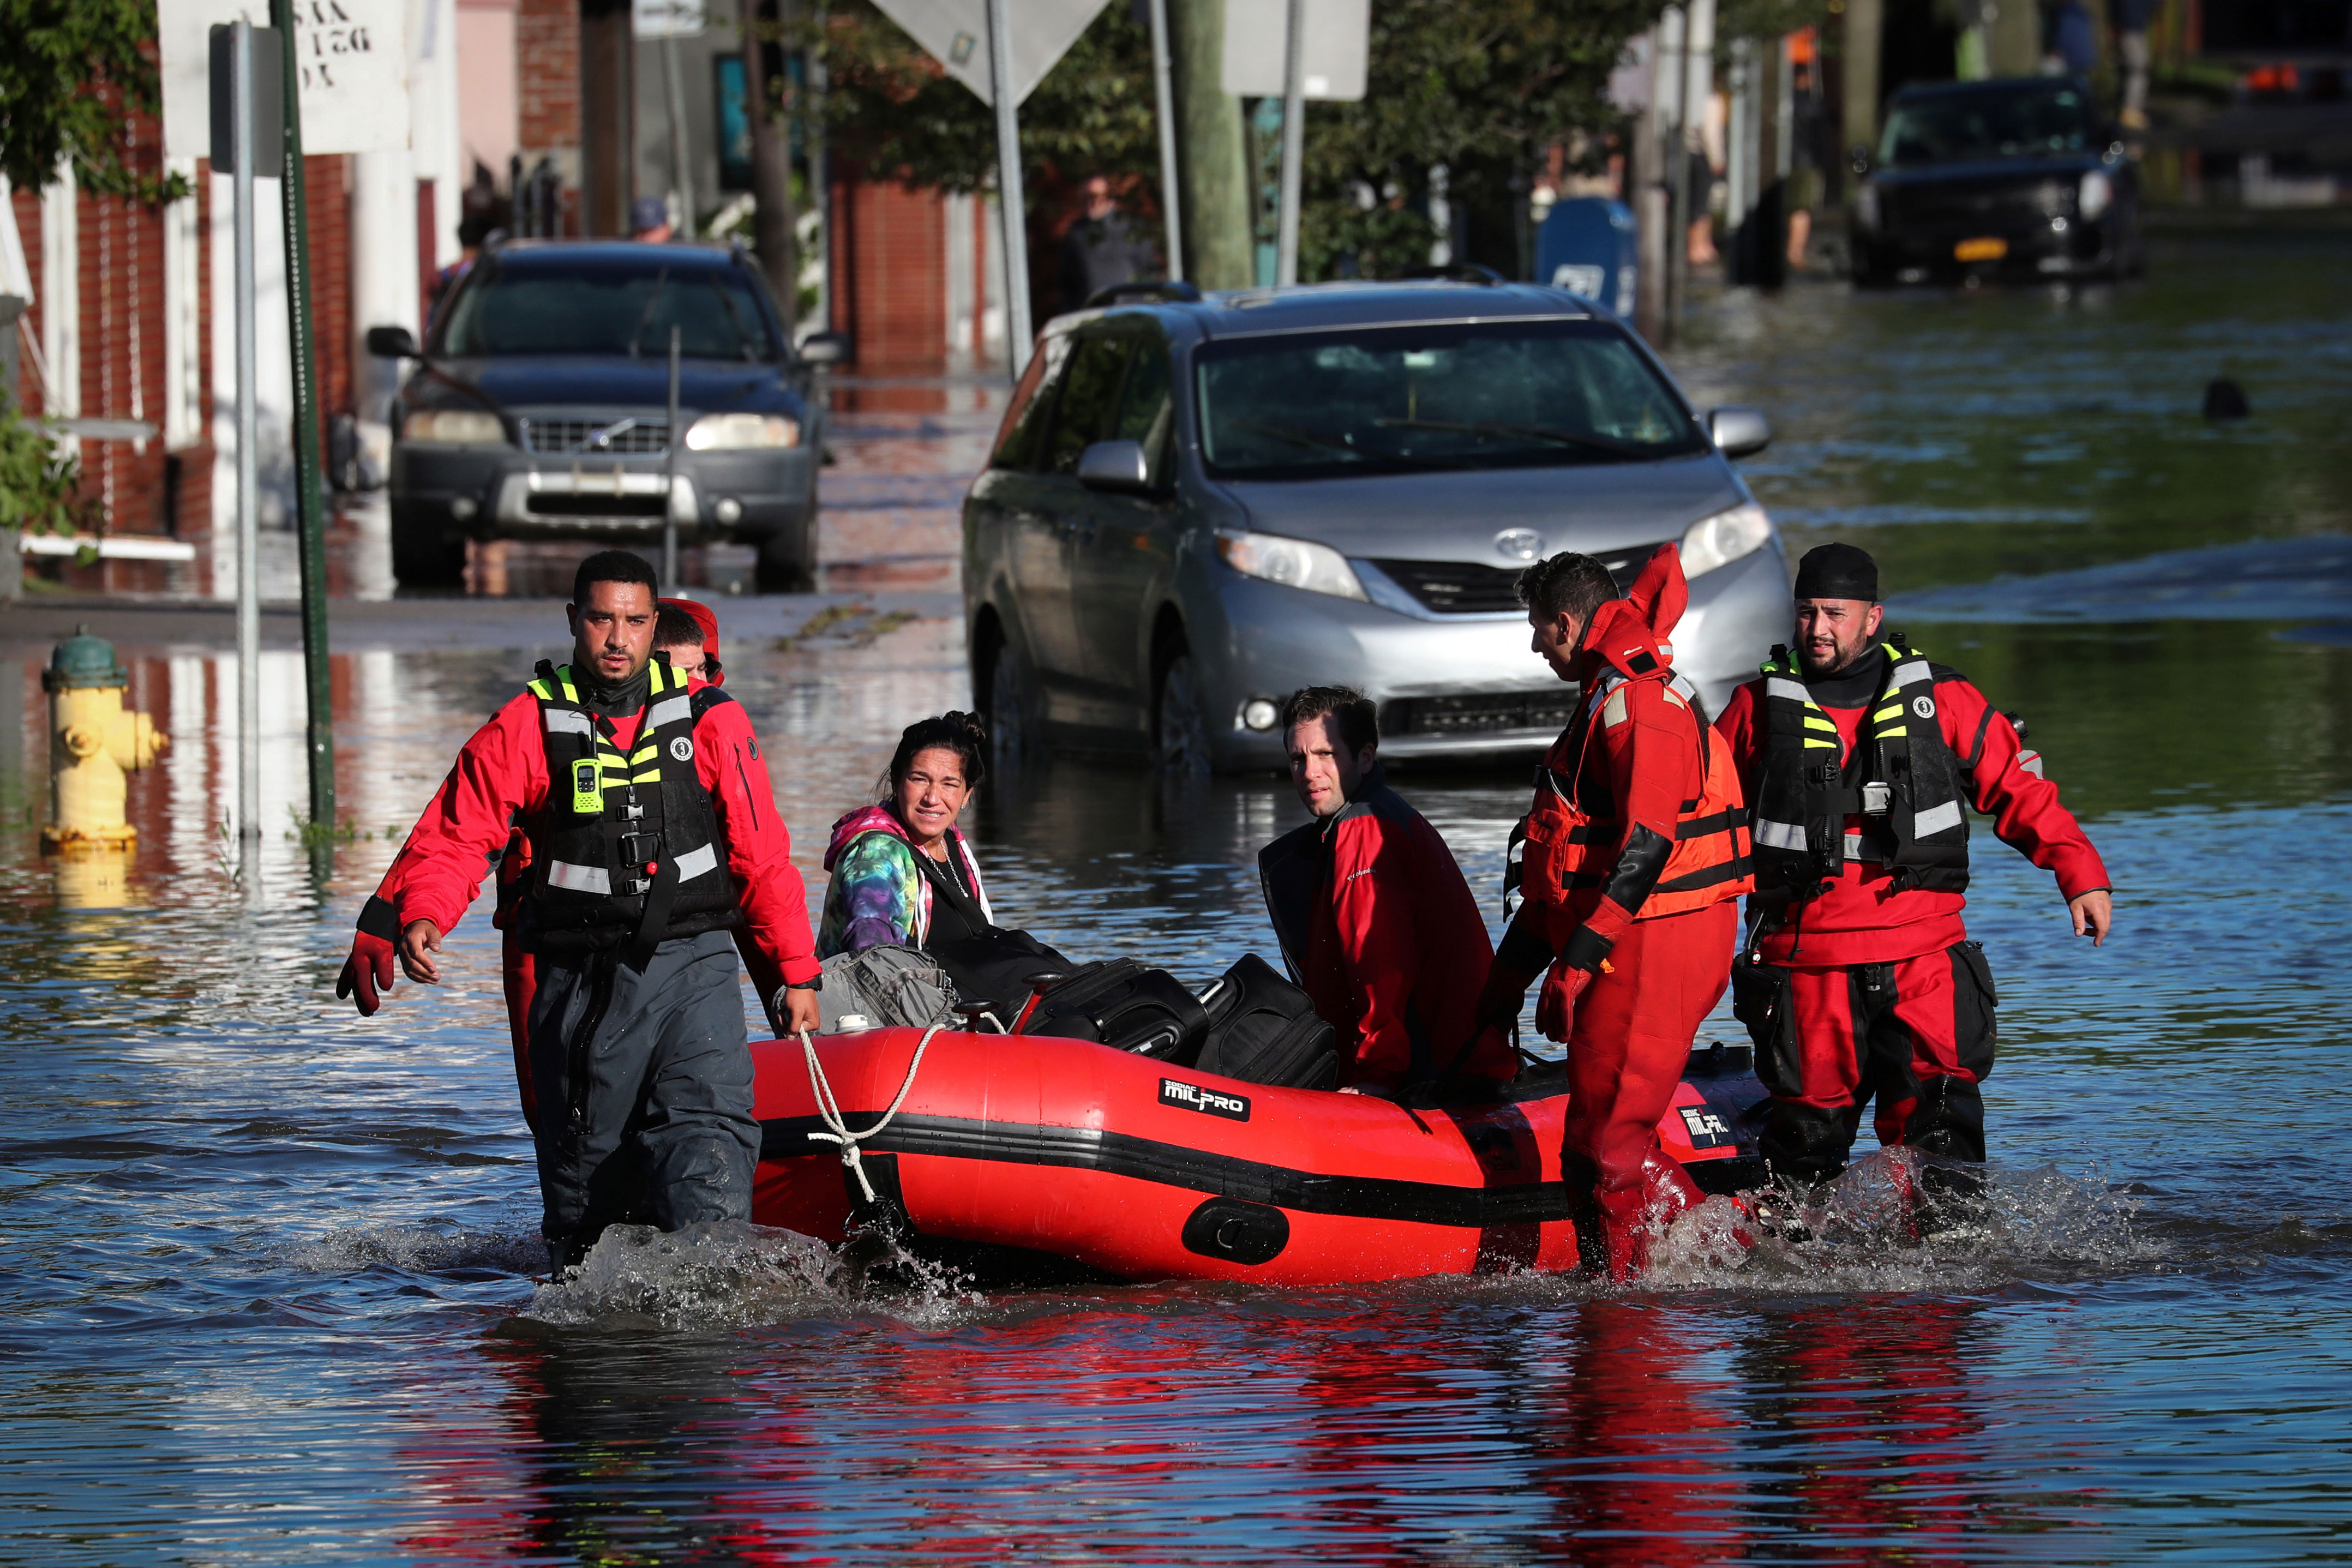 First responders pull residents in a boat as they rescue people trapped by floodwaters in Mamaroneck, New York, on September 2.